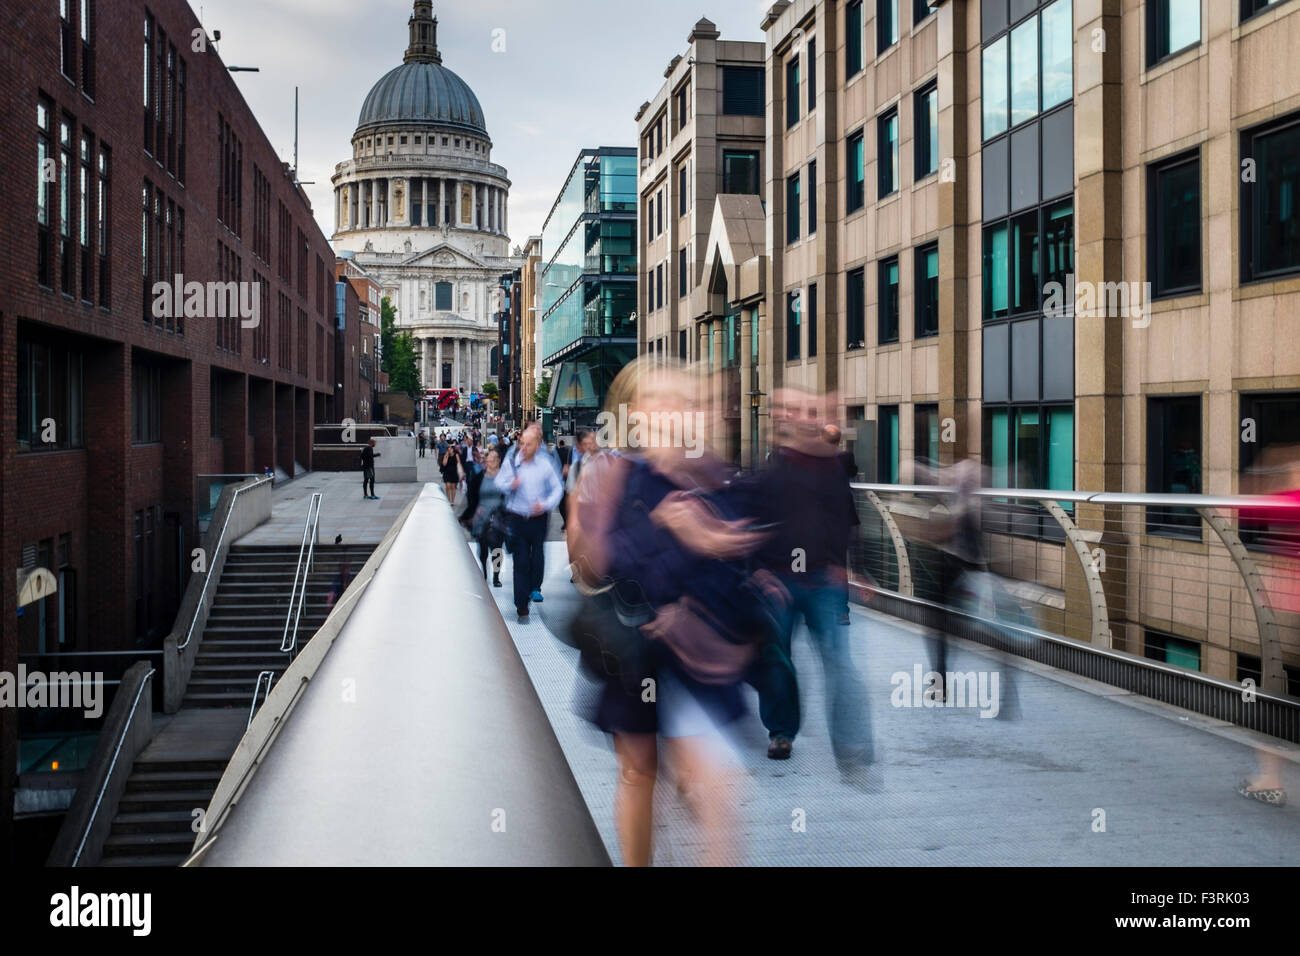 Peter's Hill and Saint Paul's Cathedral, London, United Kingdom Stock Photo